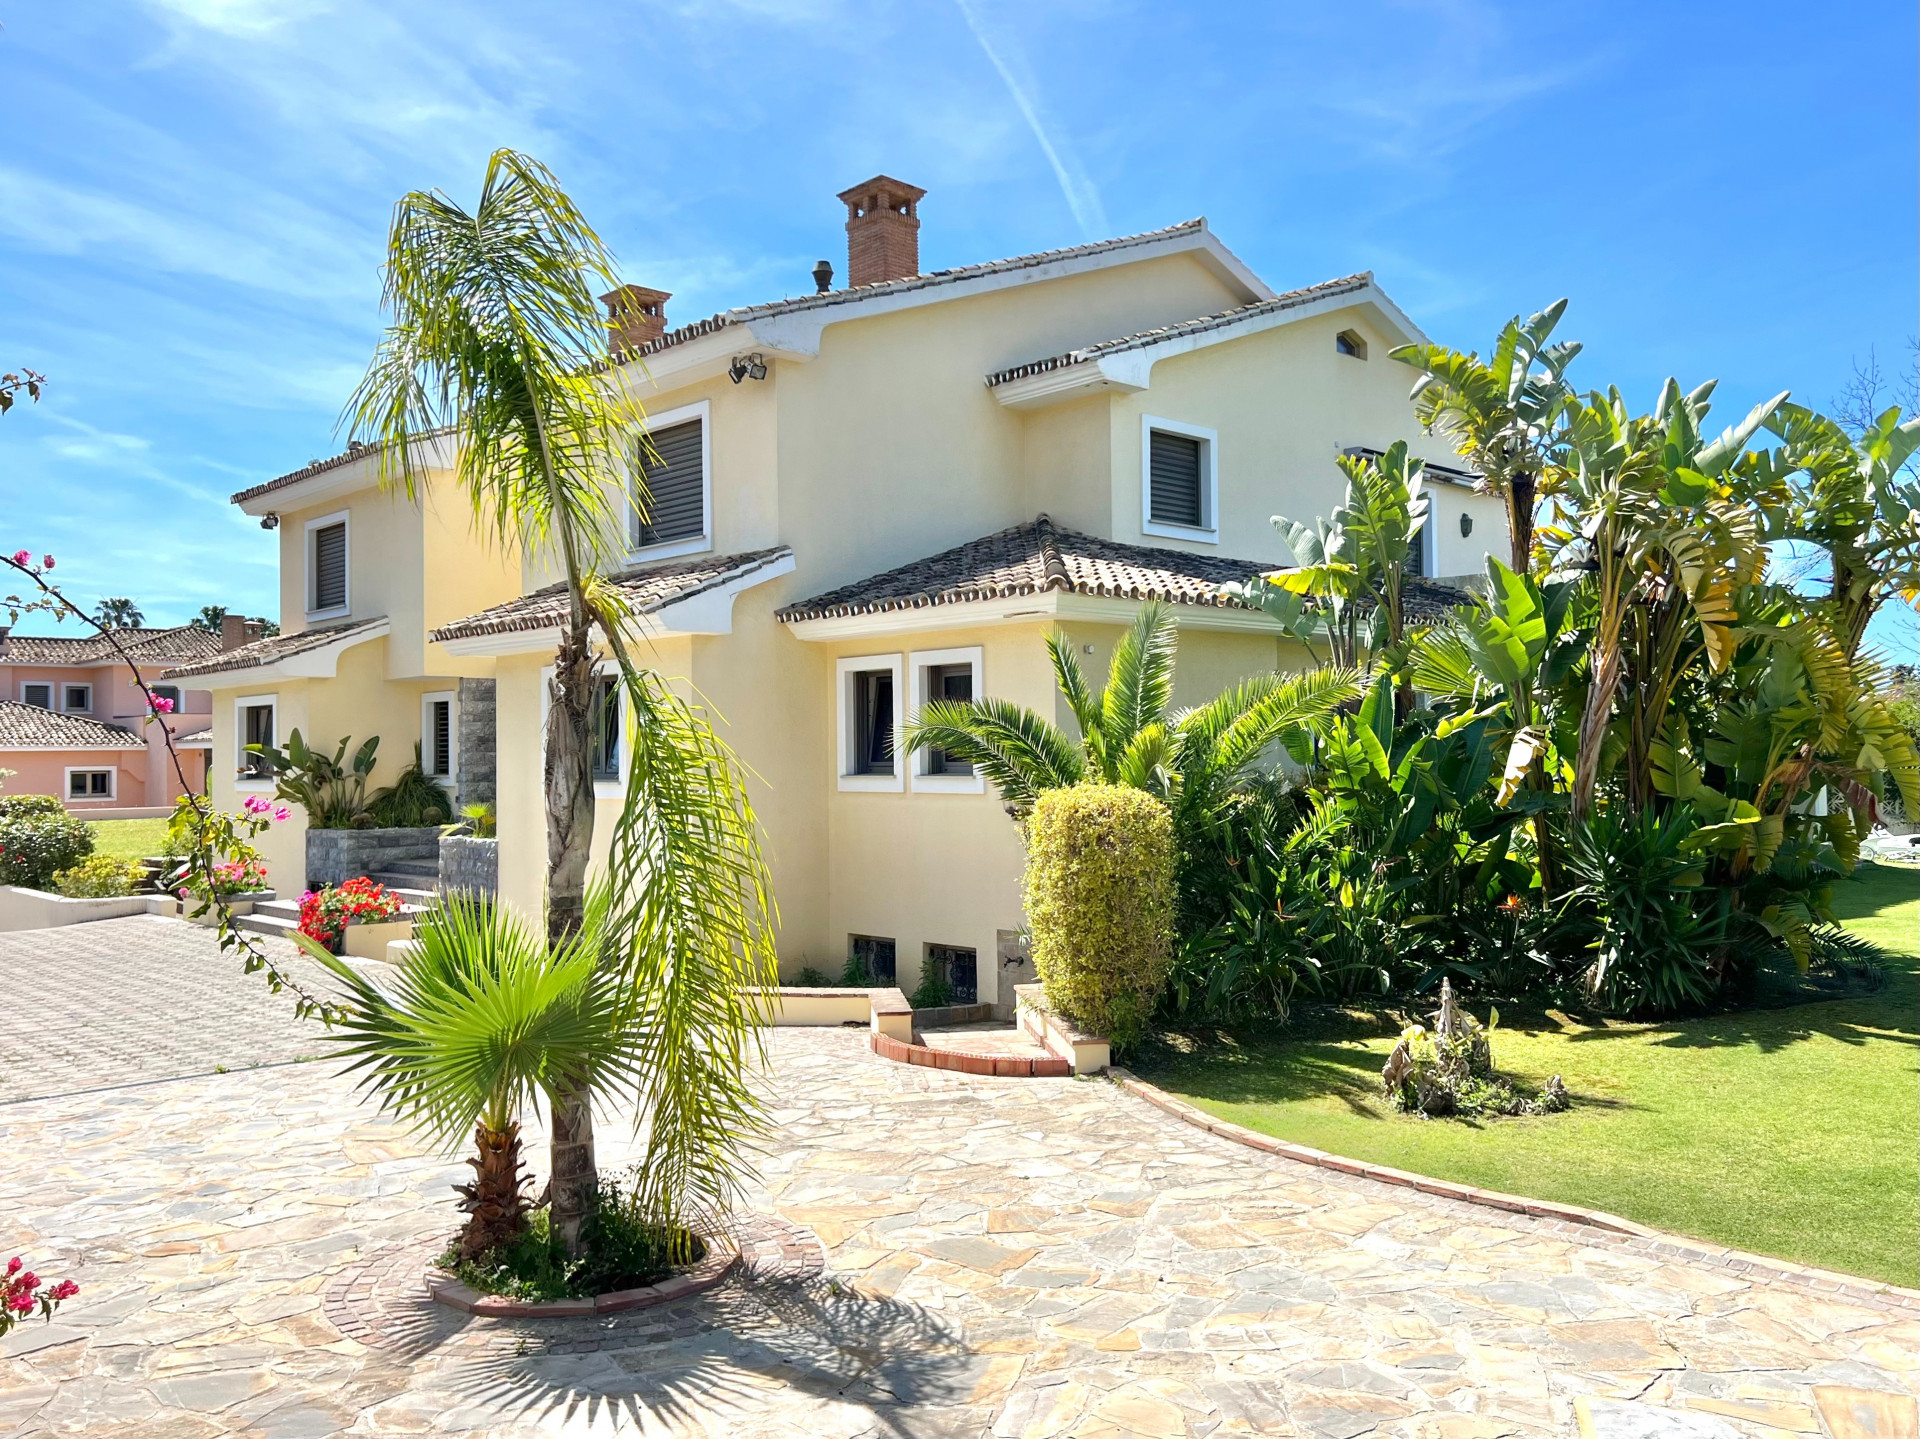 This villa in Guadalmina Baja is simply a great investment. Located in an exclusive and tranquil environment, it offers the luxury and comfort one would expect in a high-end residence on the Costa del Sol